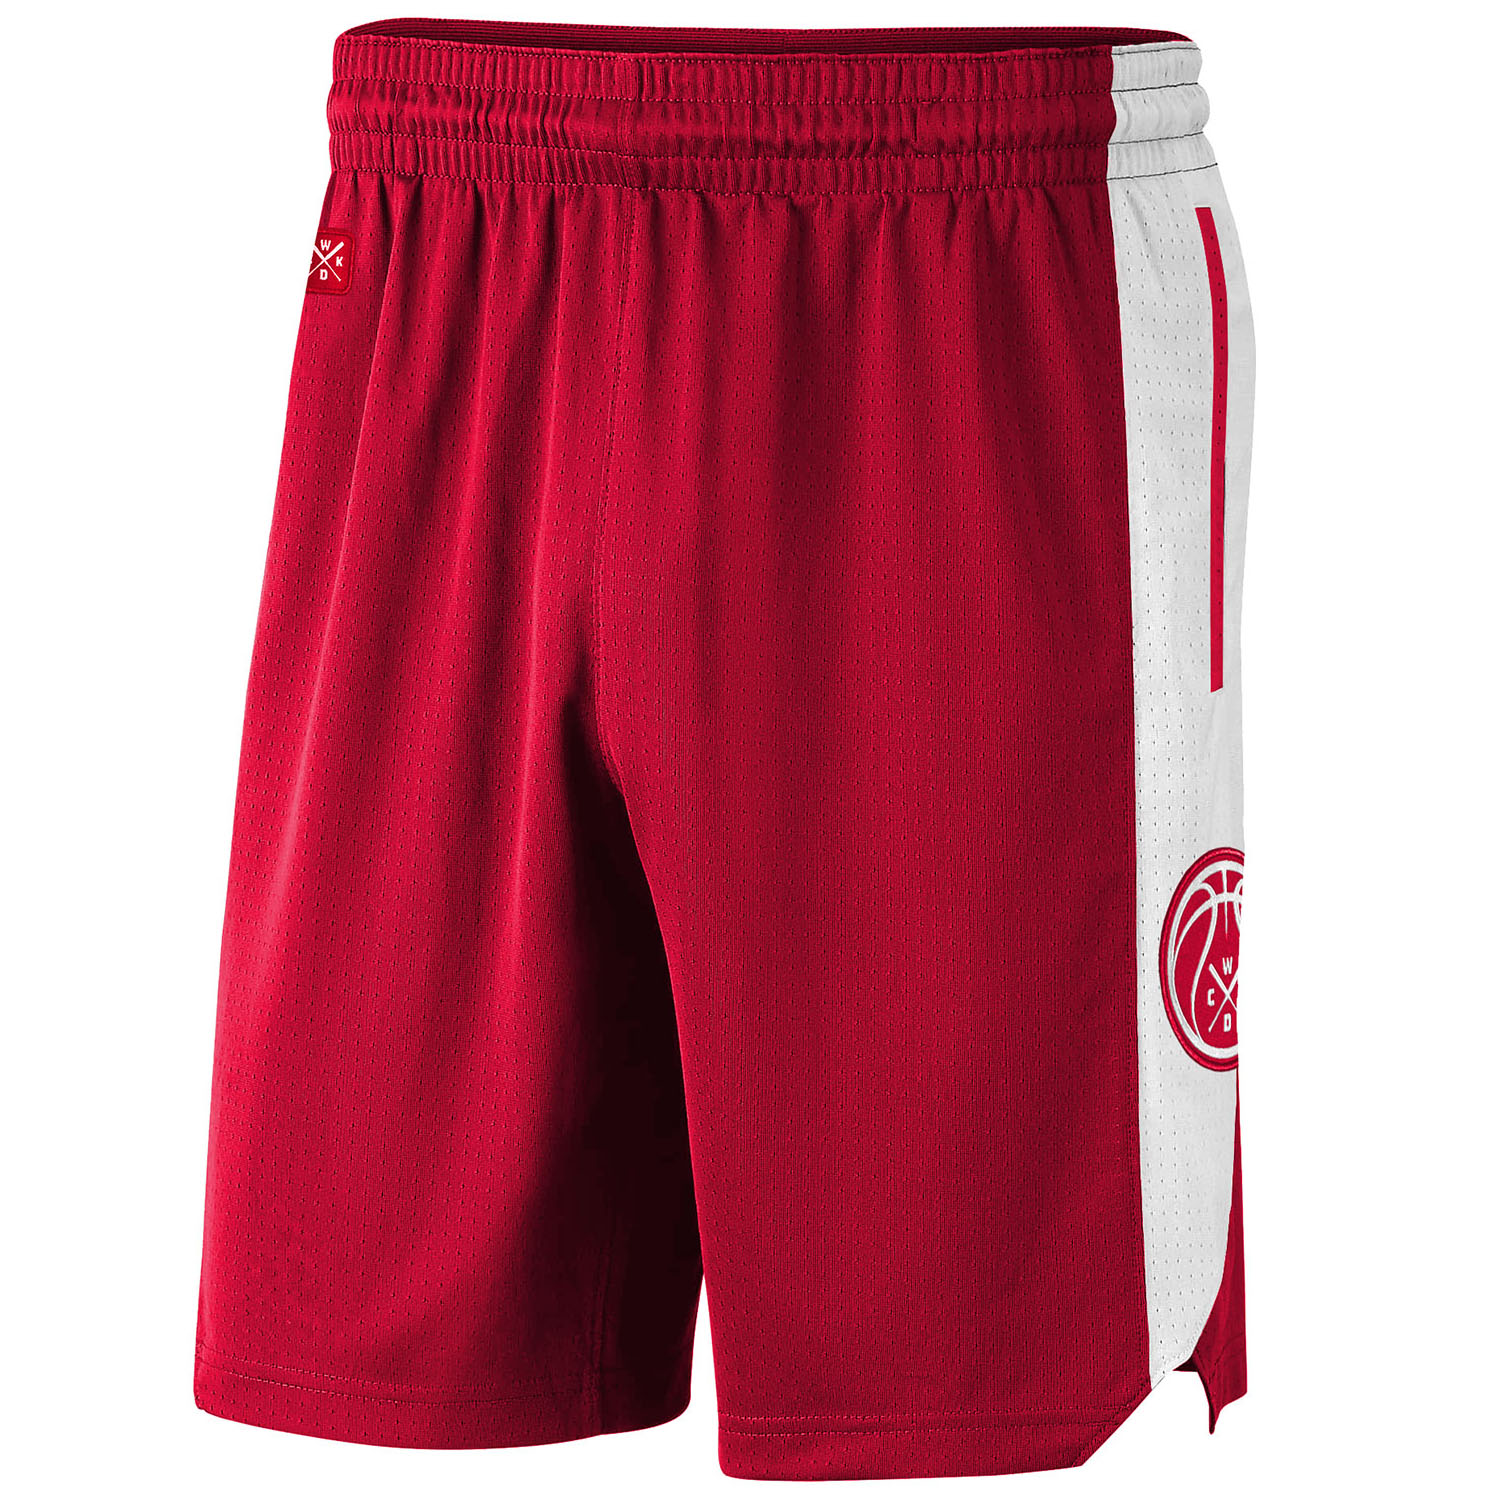 WICKED ONE Fitness Shorts, Playoffs, red-white